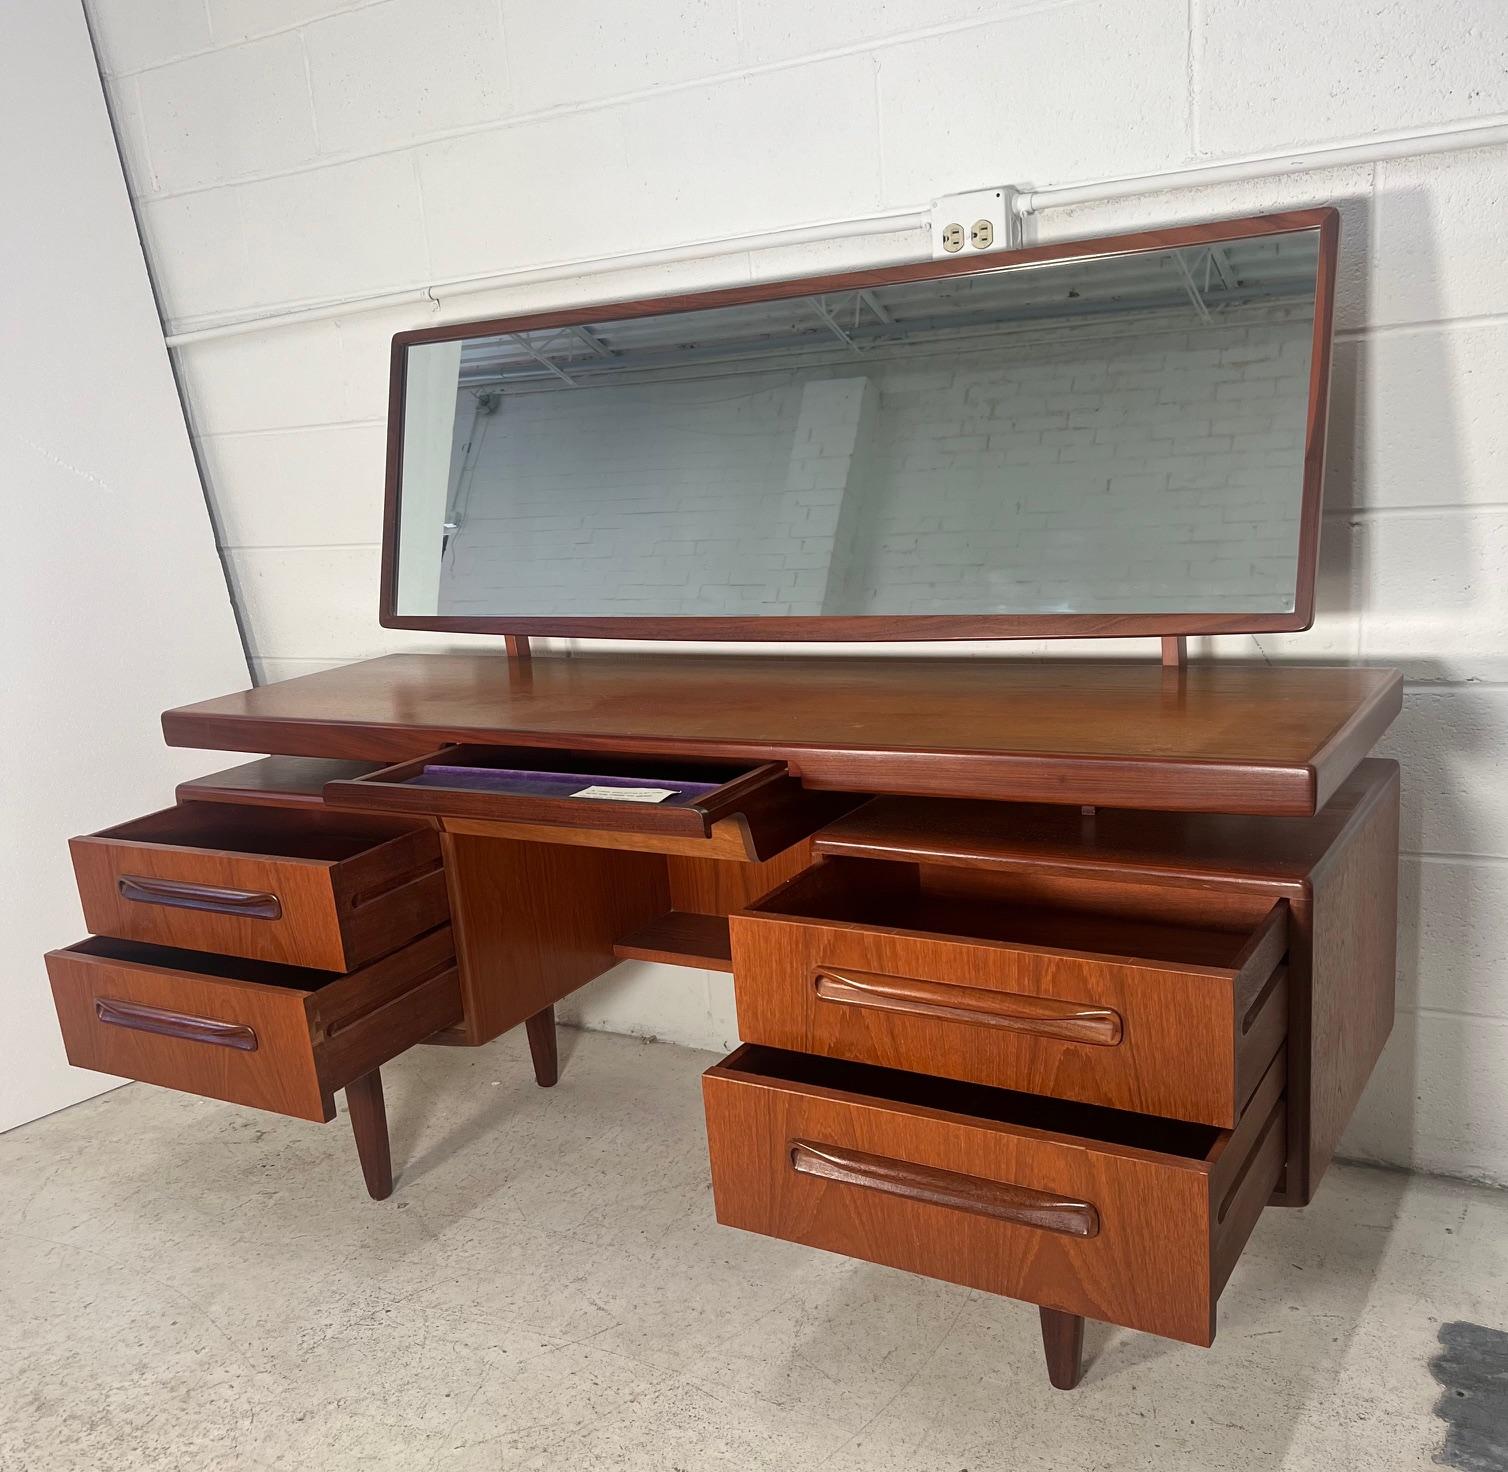 Fantastic mid-century teak vanity with stool. Designed in the 60s by Victor Bramwell Wilkins for G Plan's Fresco Range. Secret drawer has original purple fabric. Gorgeous continuous grain pattern on the front of the drawers. Original G Plan sticker